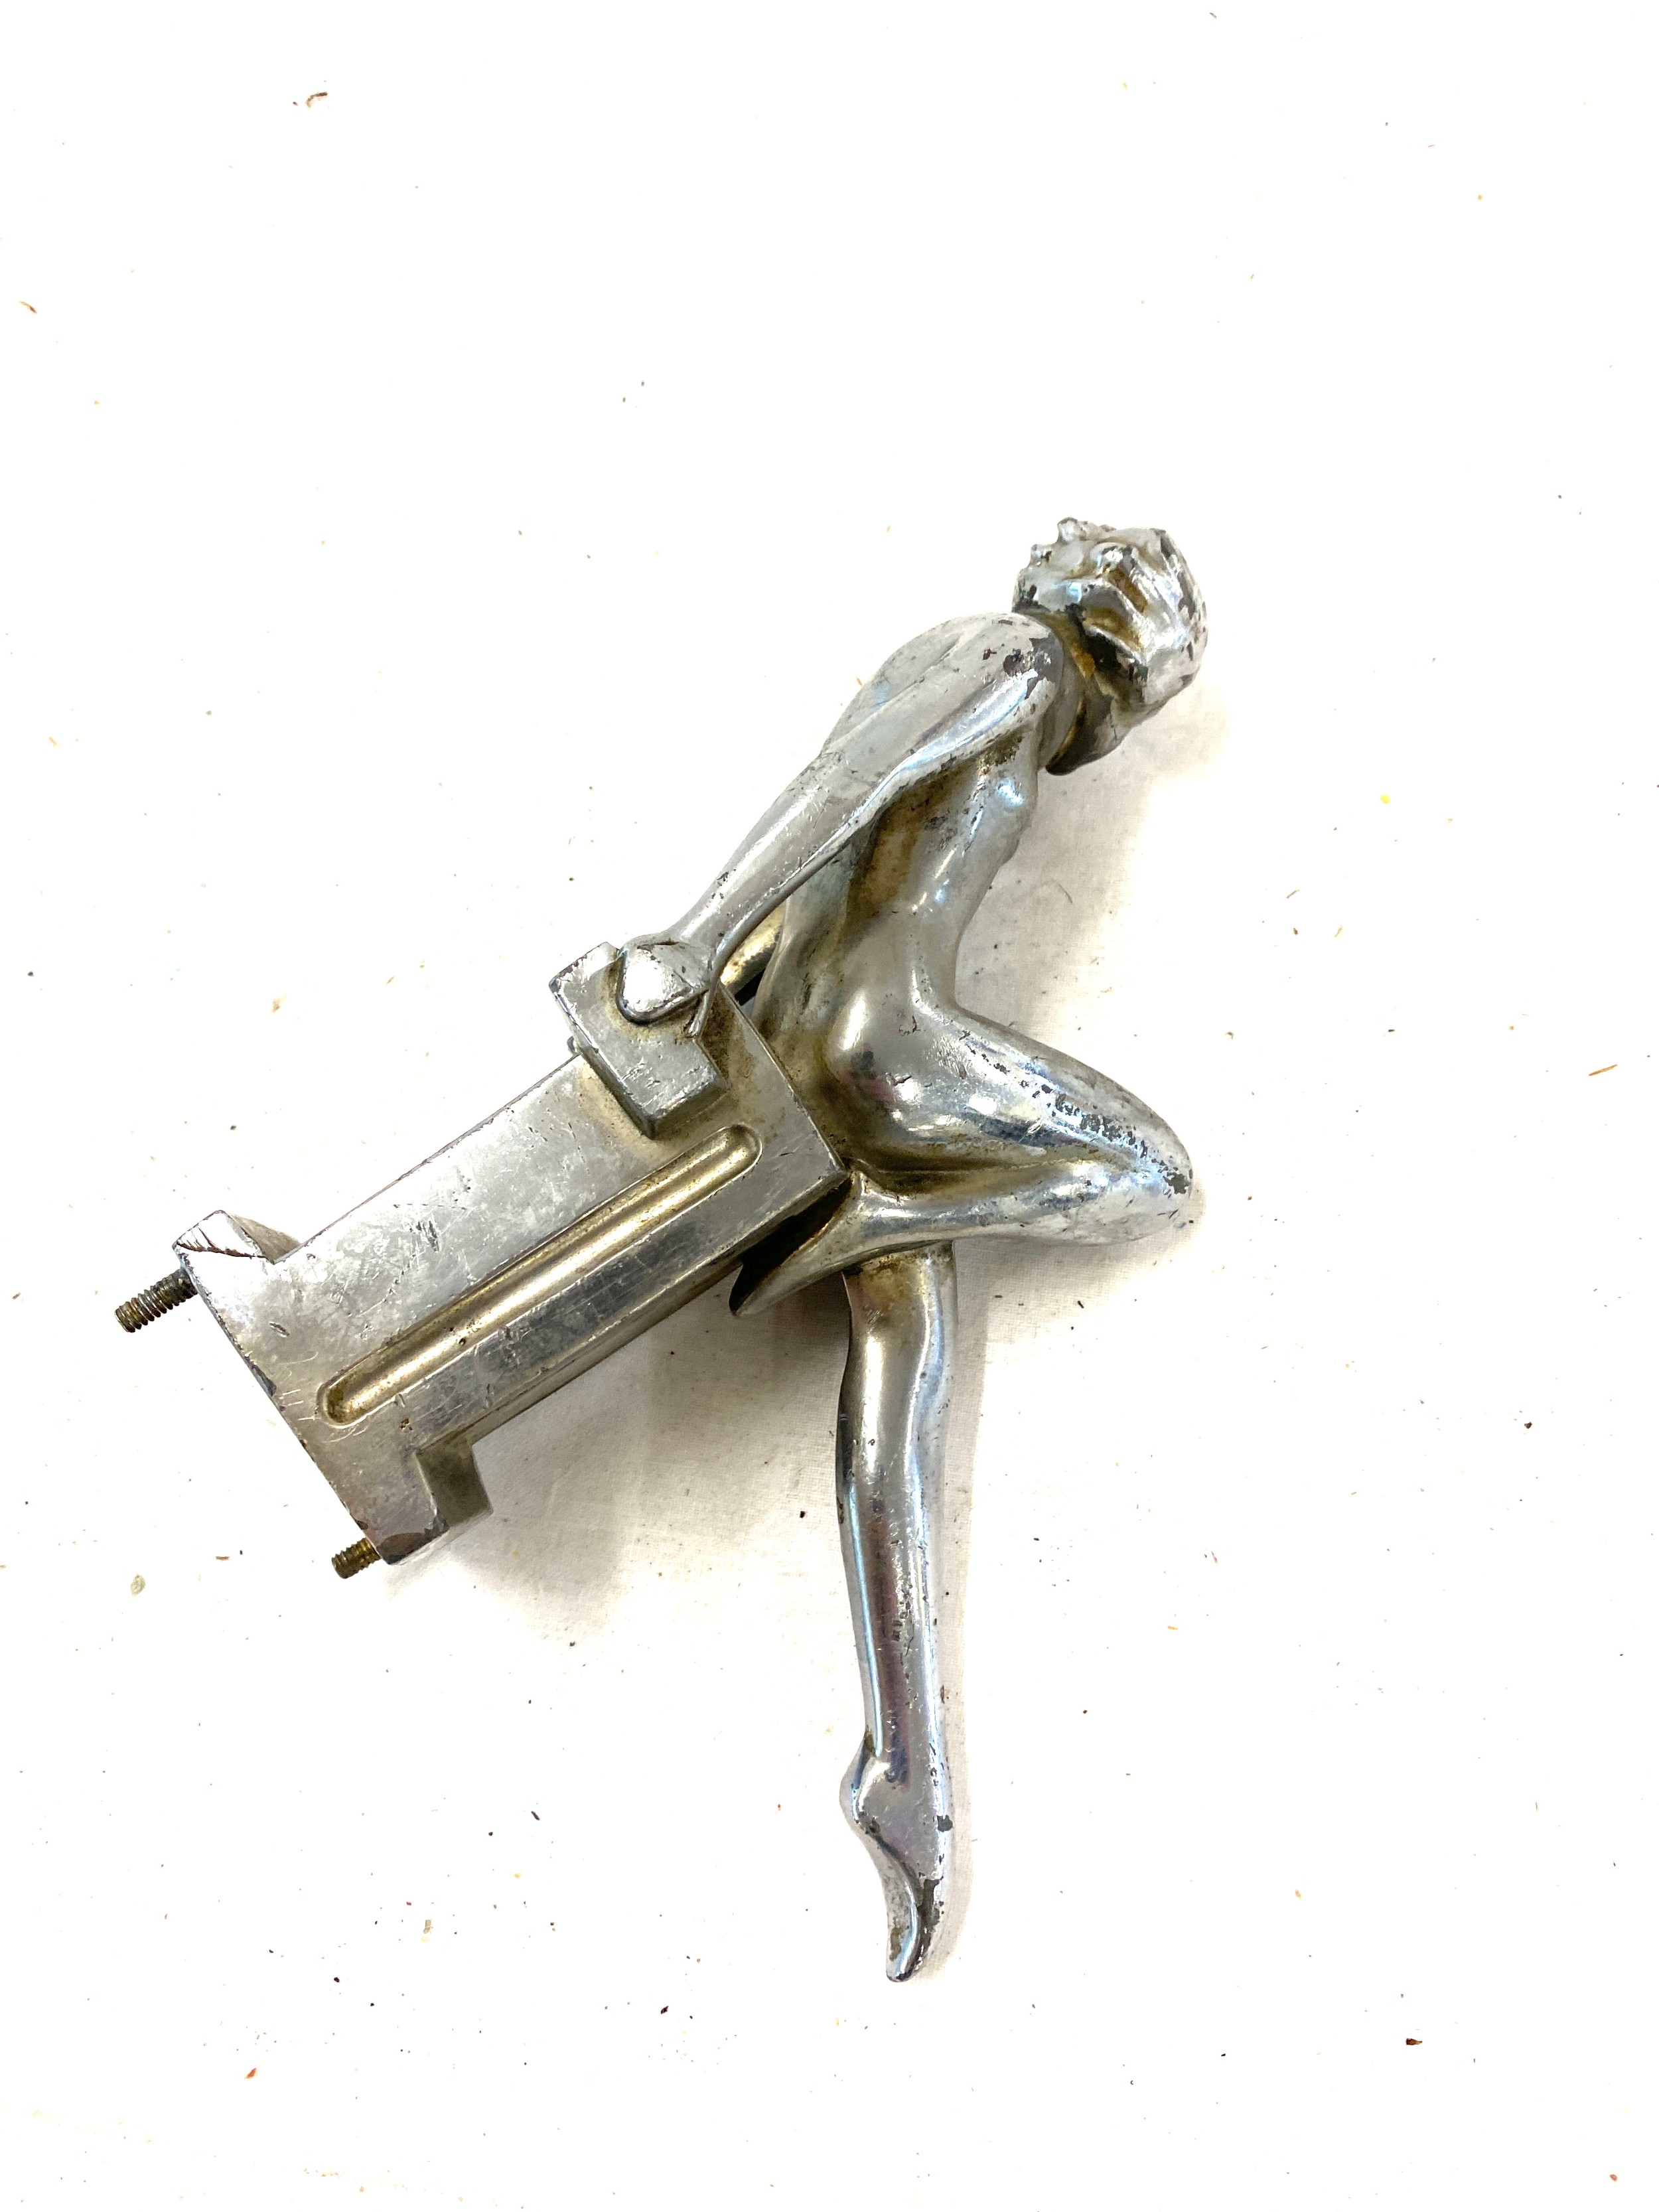 Vintage lady mascot, damaged leg as seen in images measures approx 6 inches tall by 6 inches wide - Image 4 of 5